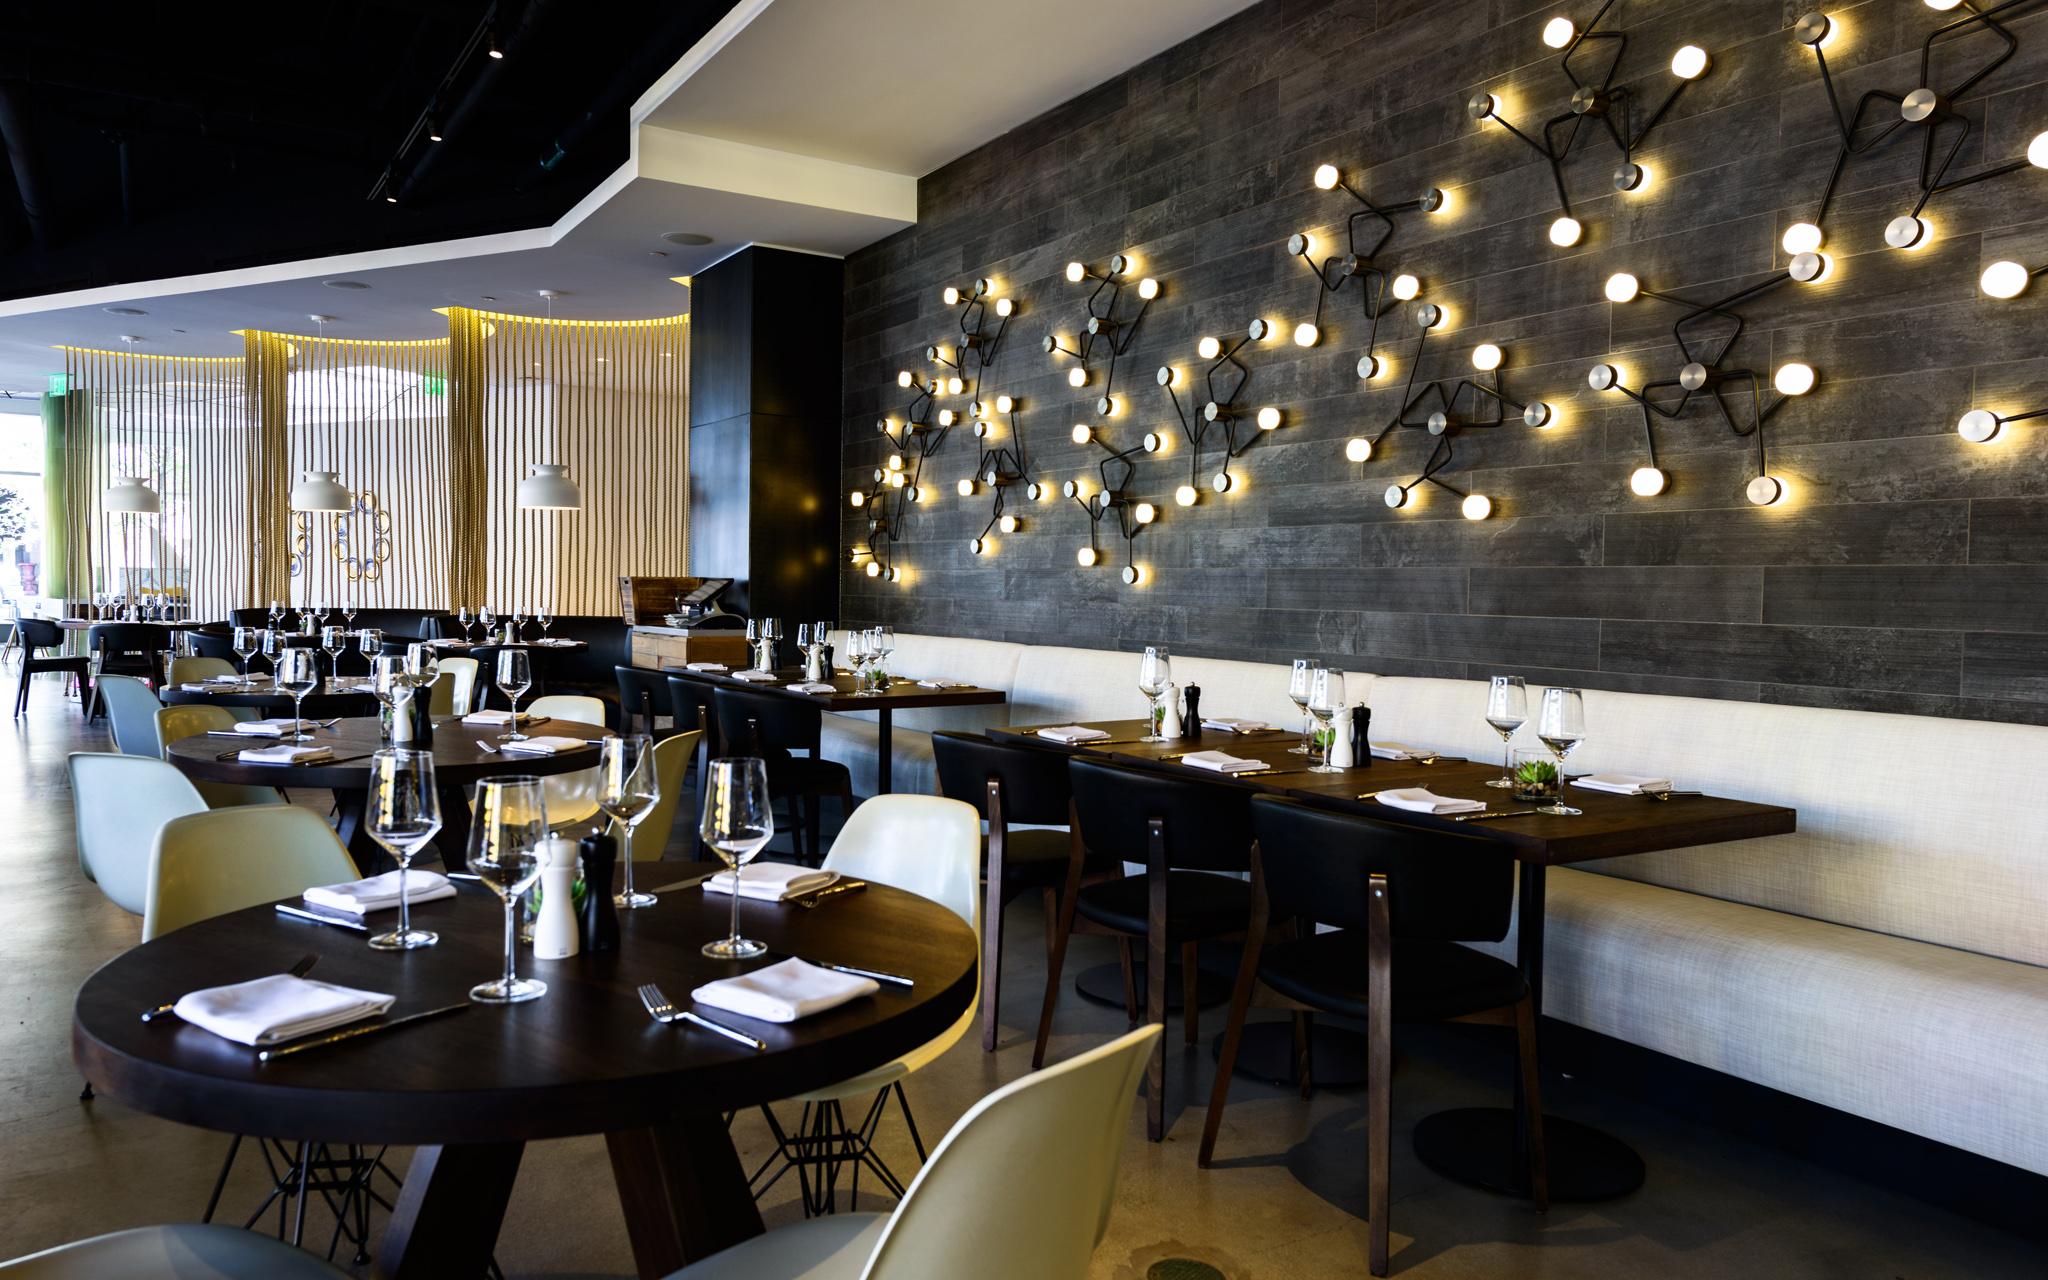 The Outlook restaurant serves seafood and steak in stylish surrounds